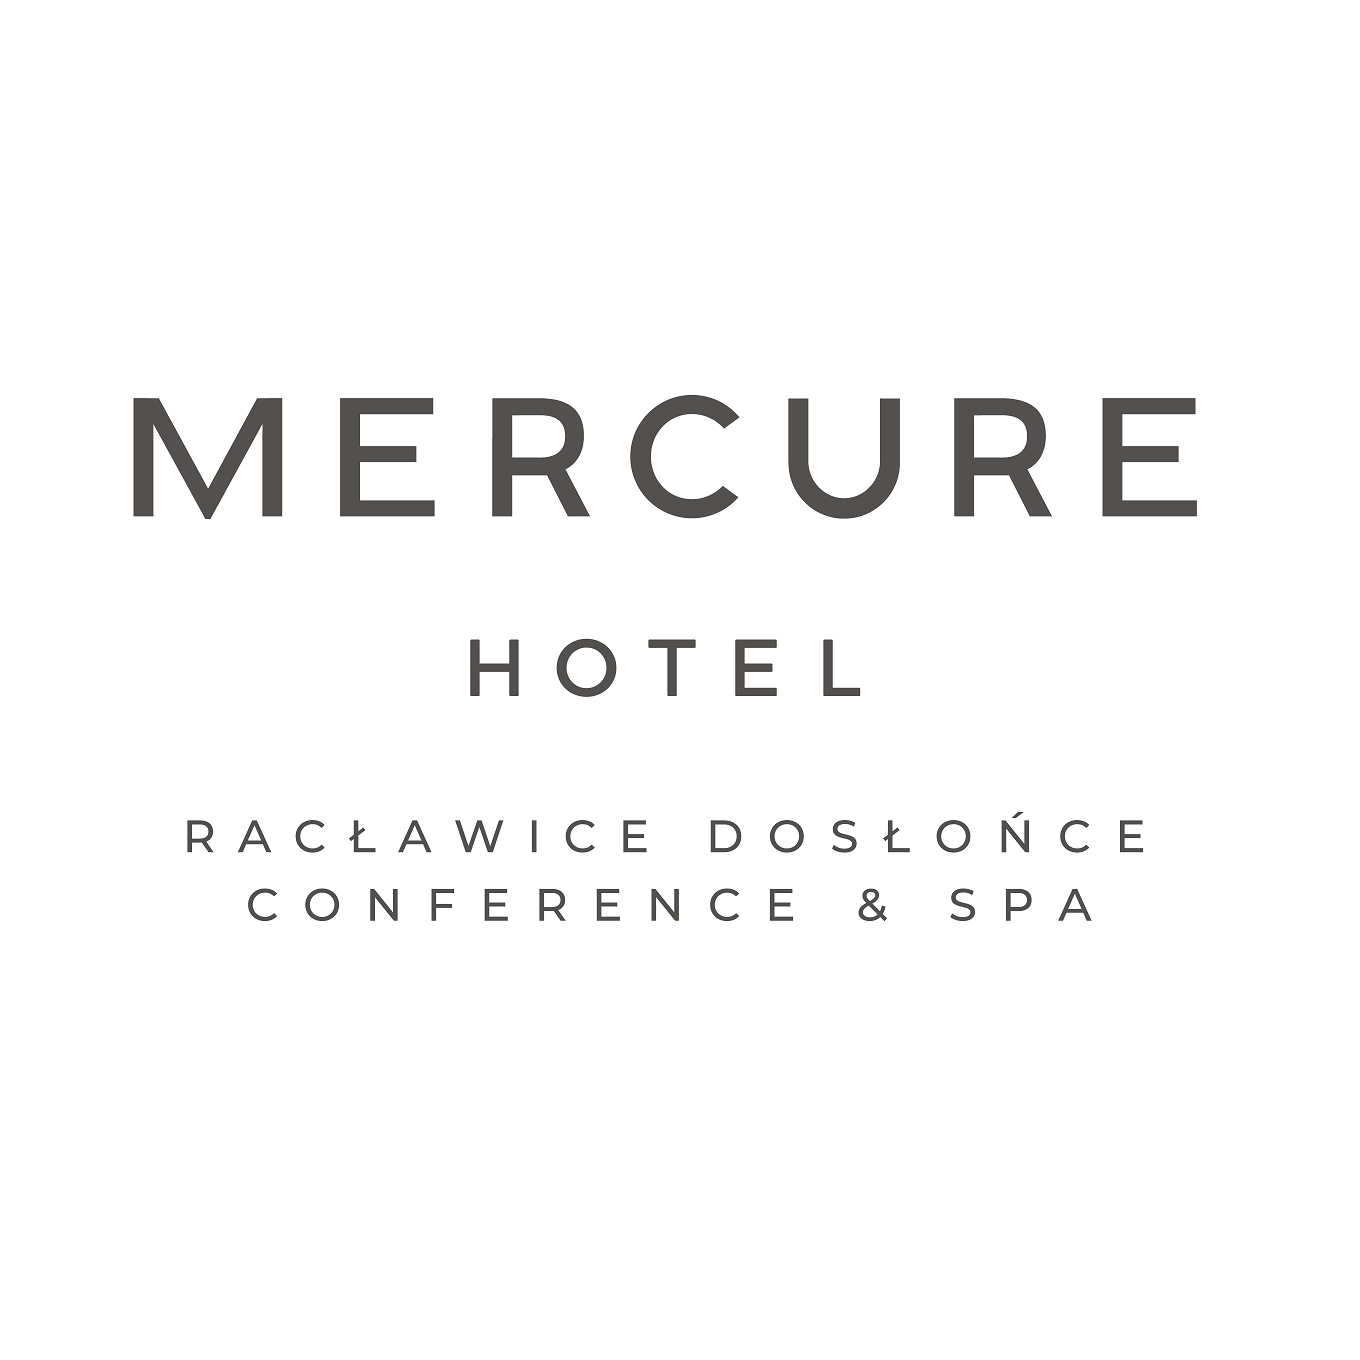 Hotel Mercure Raclawice Doslonce Conference & SPA Logo